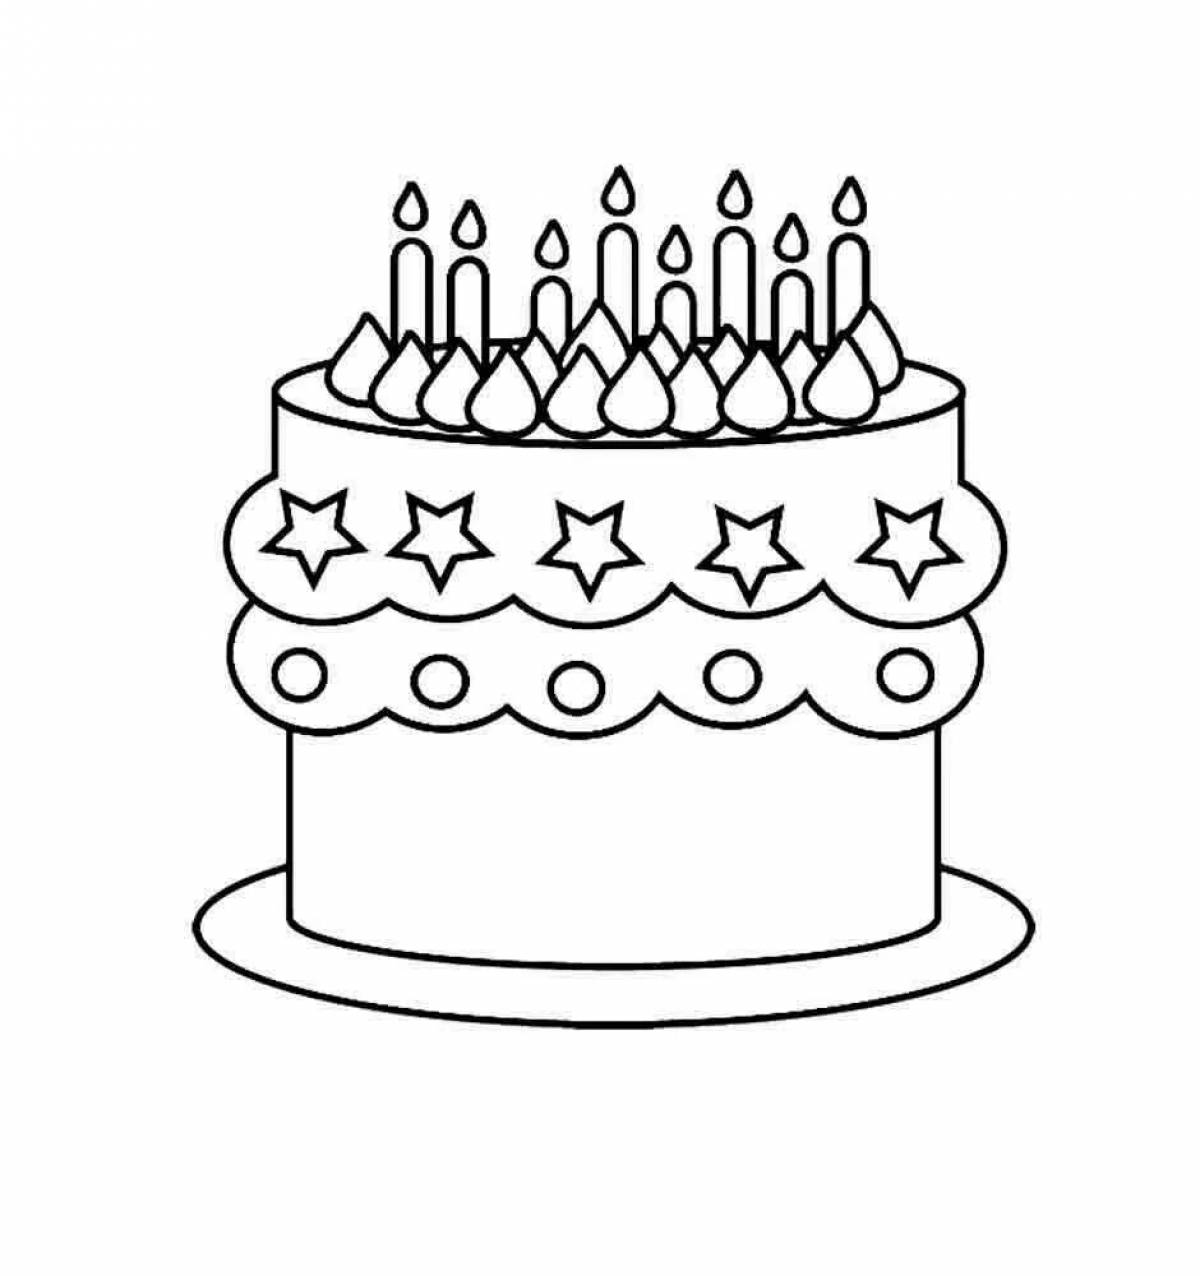 Colorful bright birthday cake coloring book